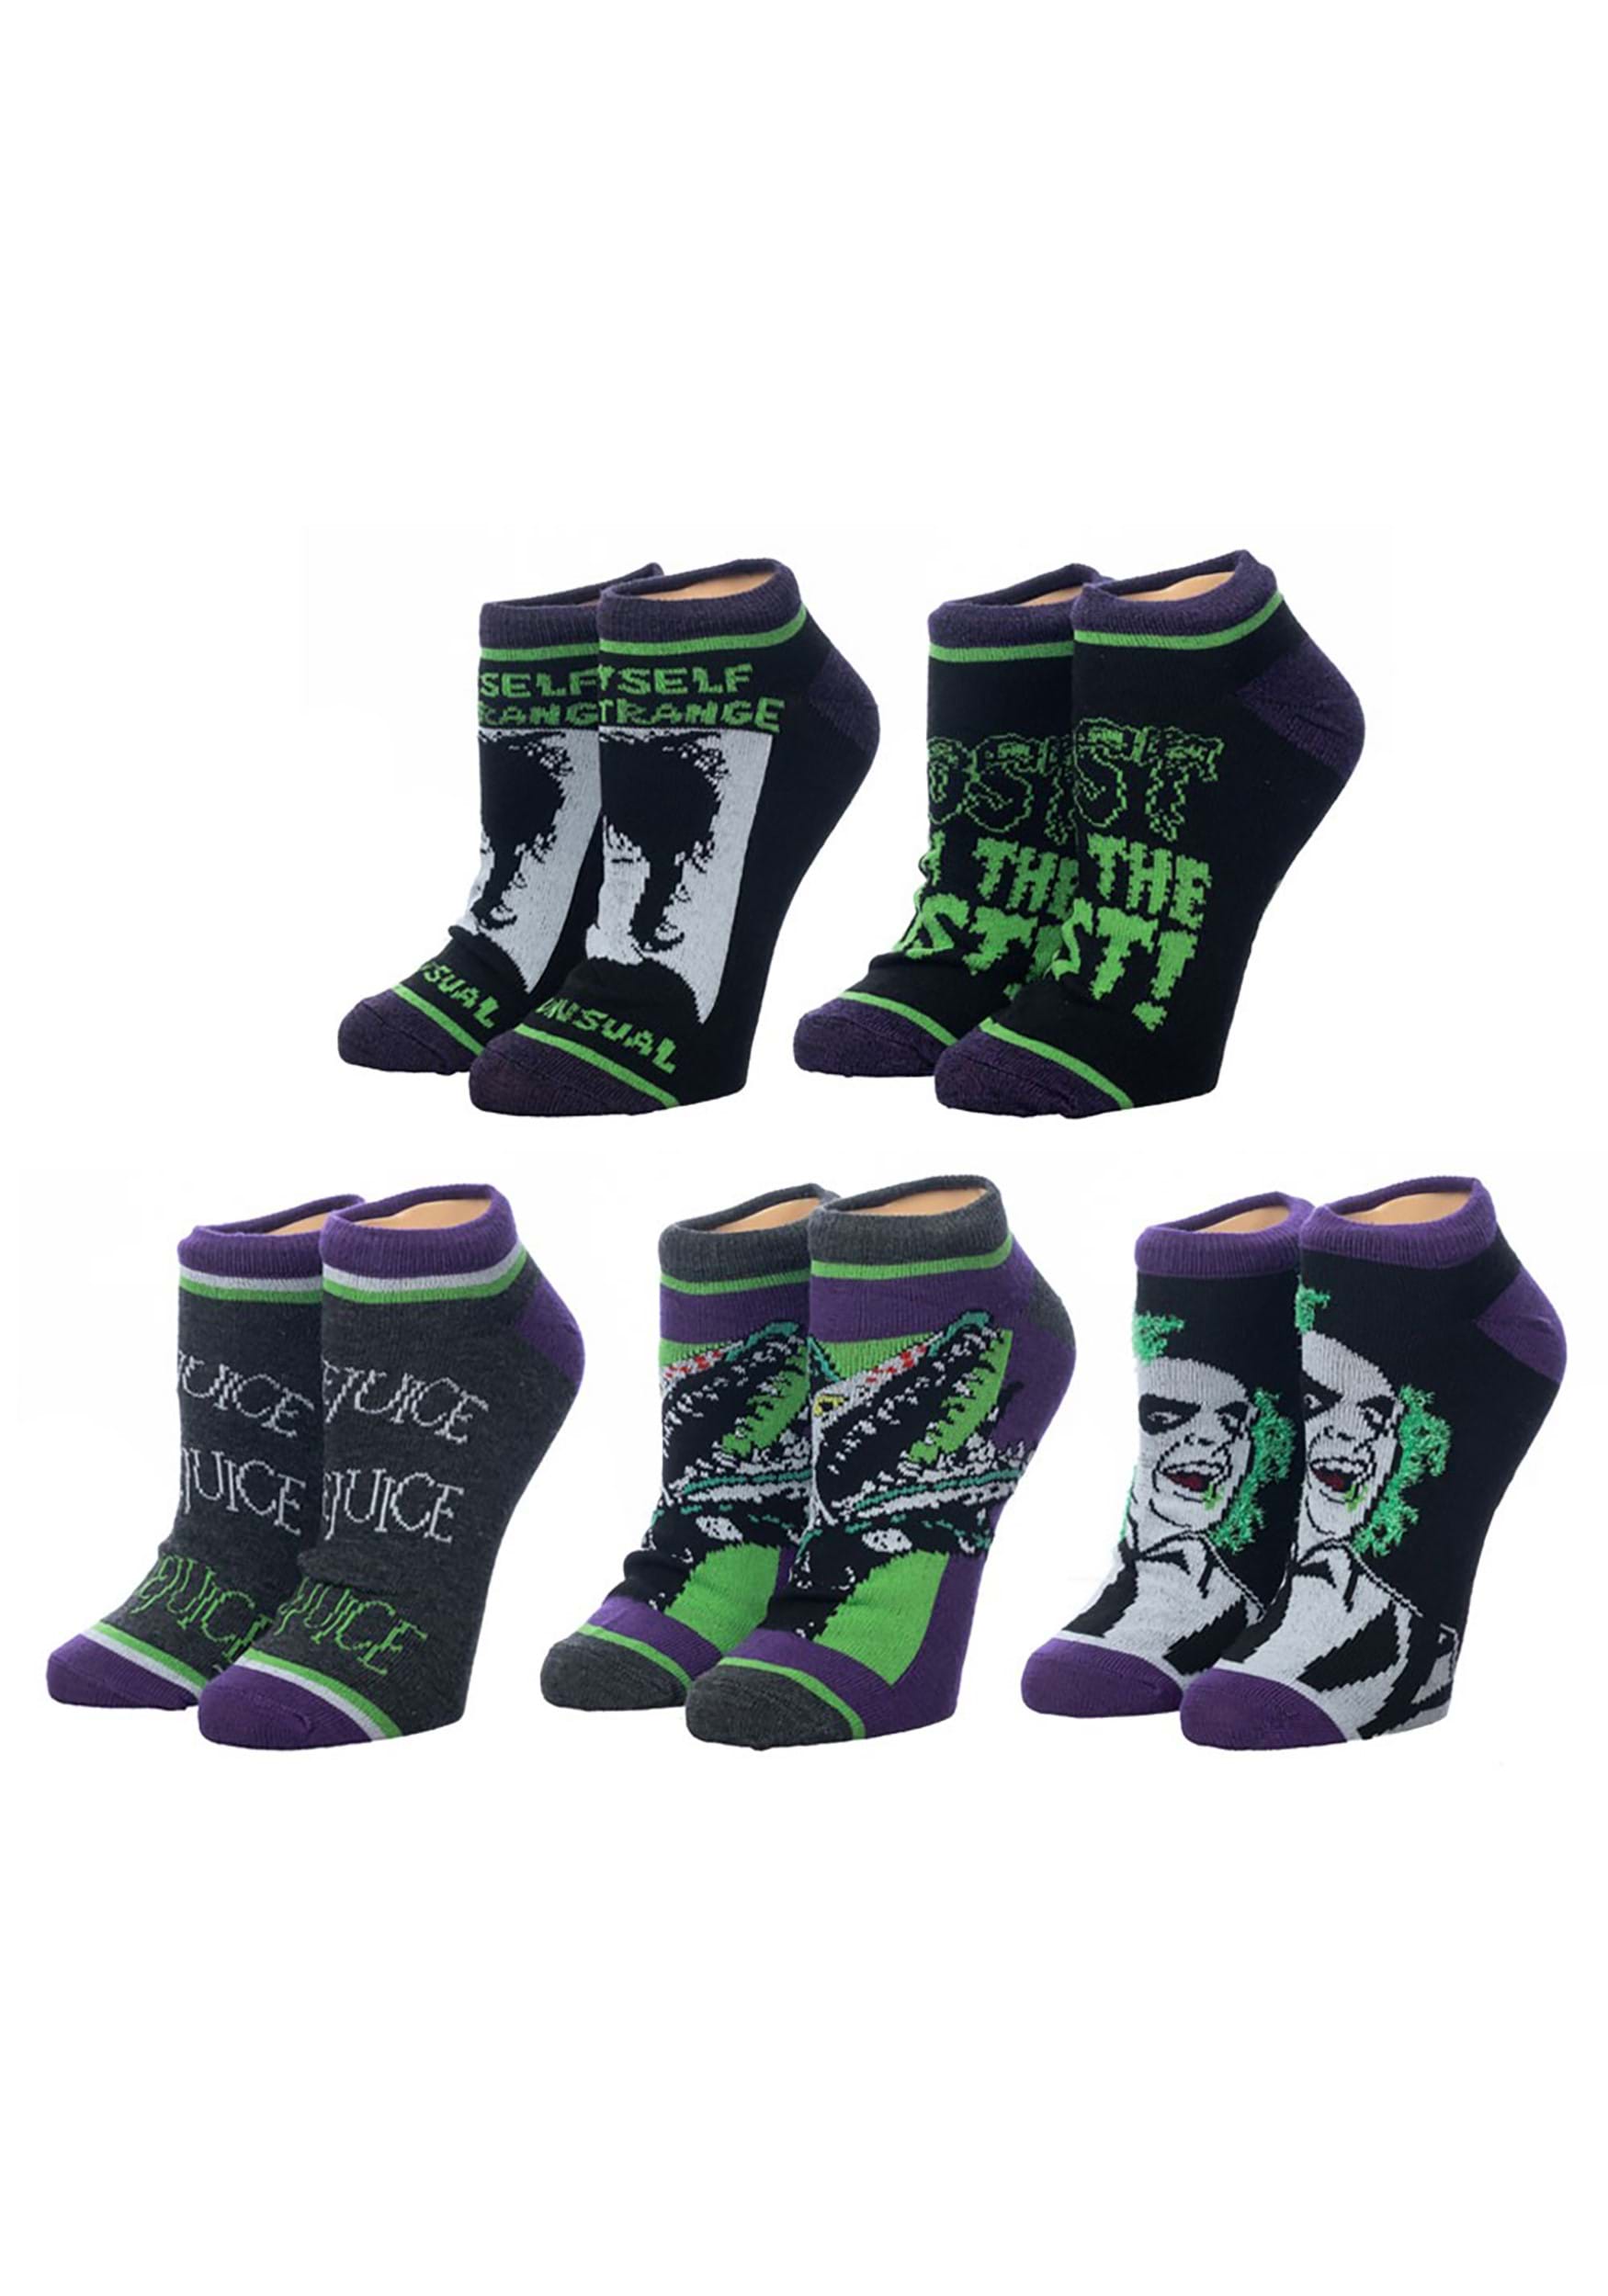 Rick and Morty Womens Ankle-No Show Socks 5 Pair Pack 